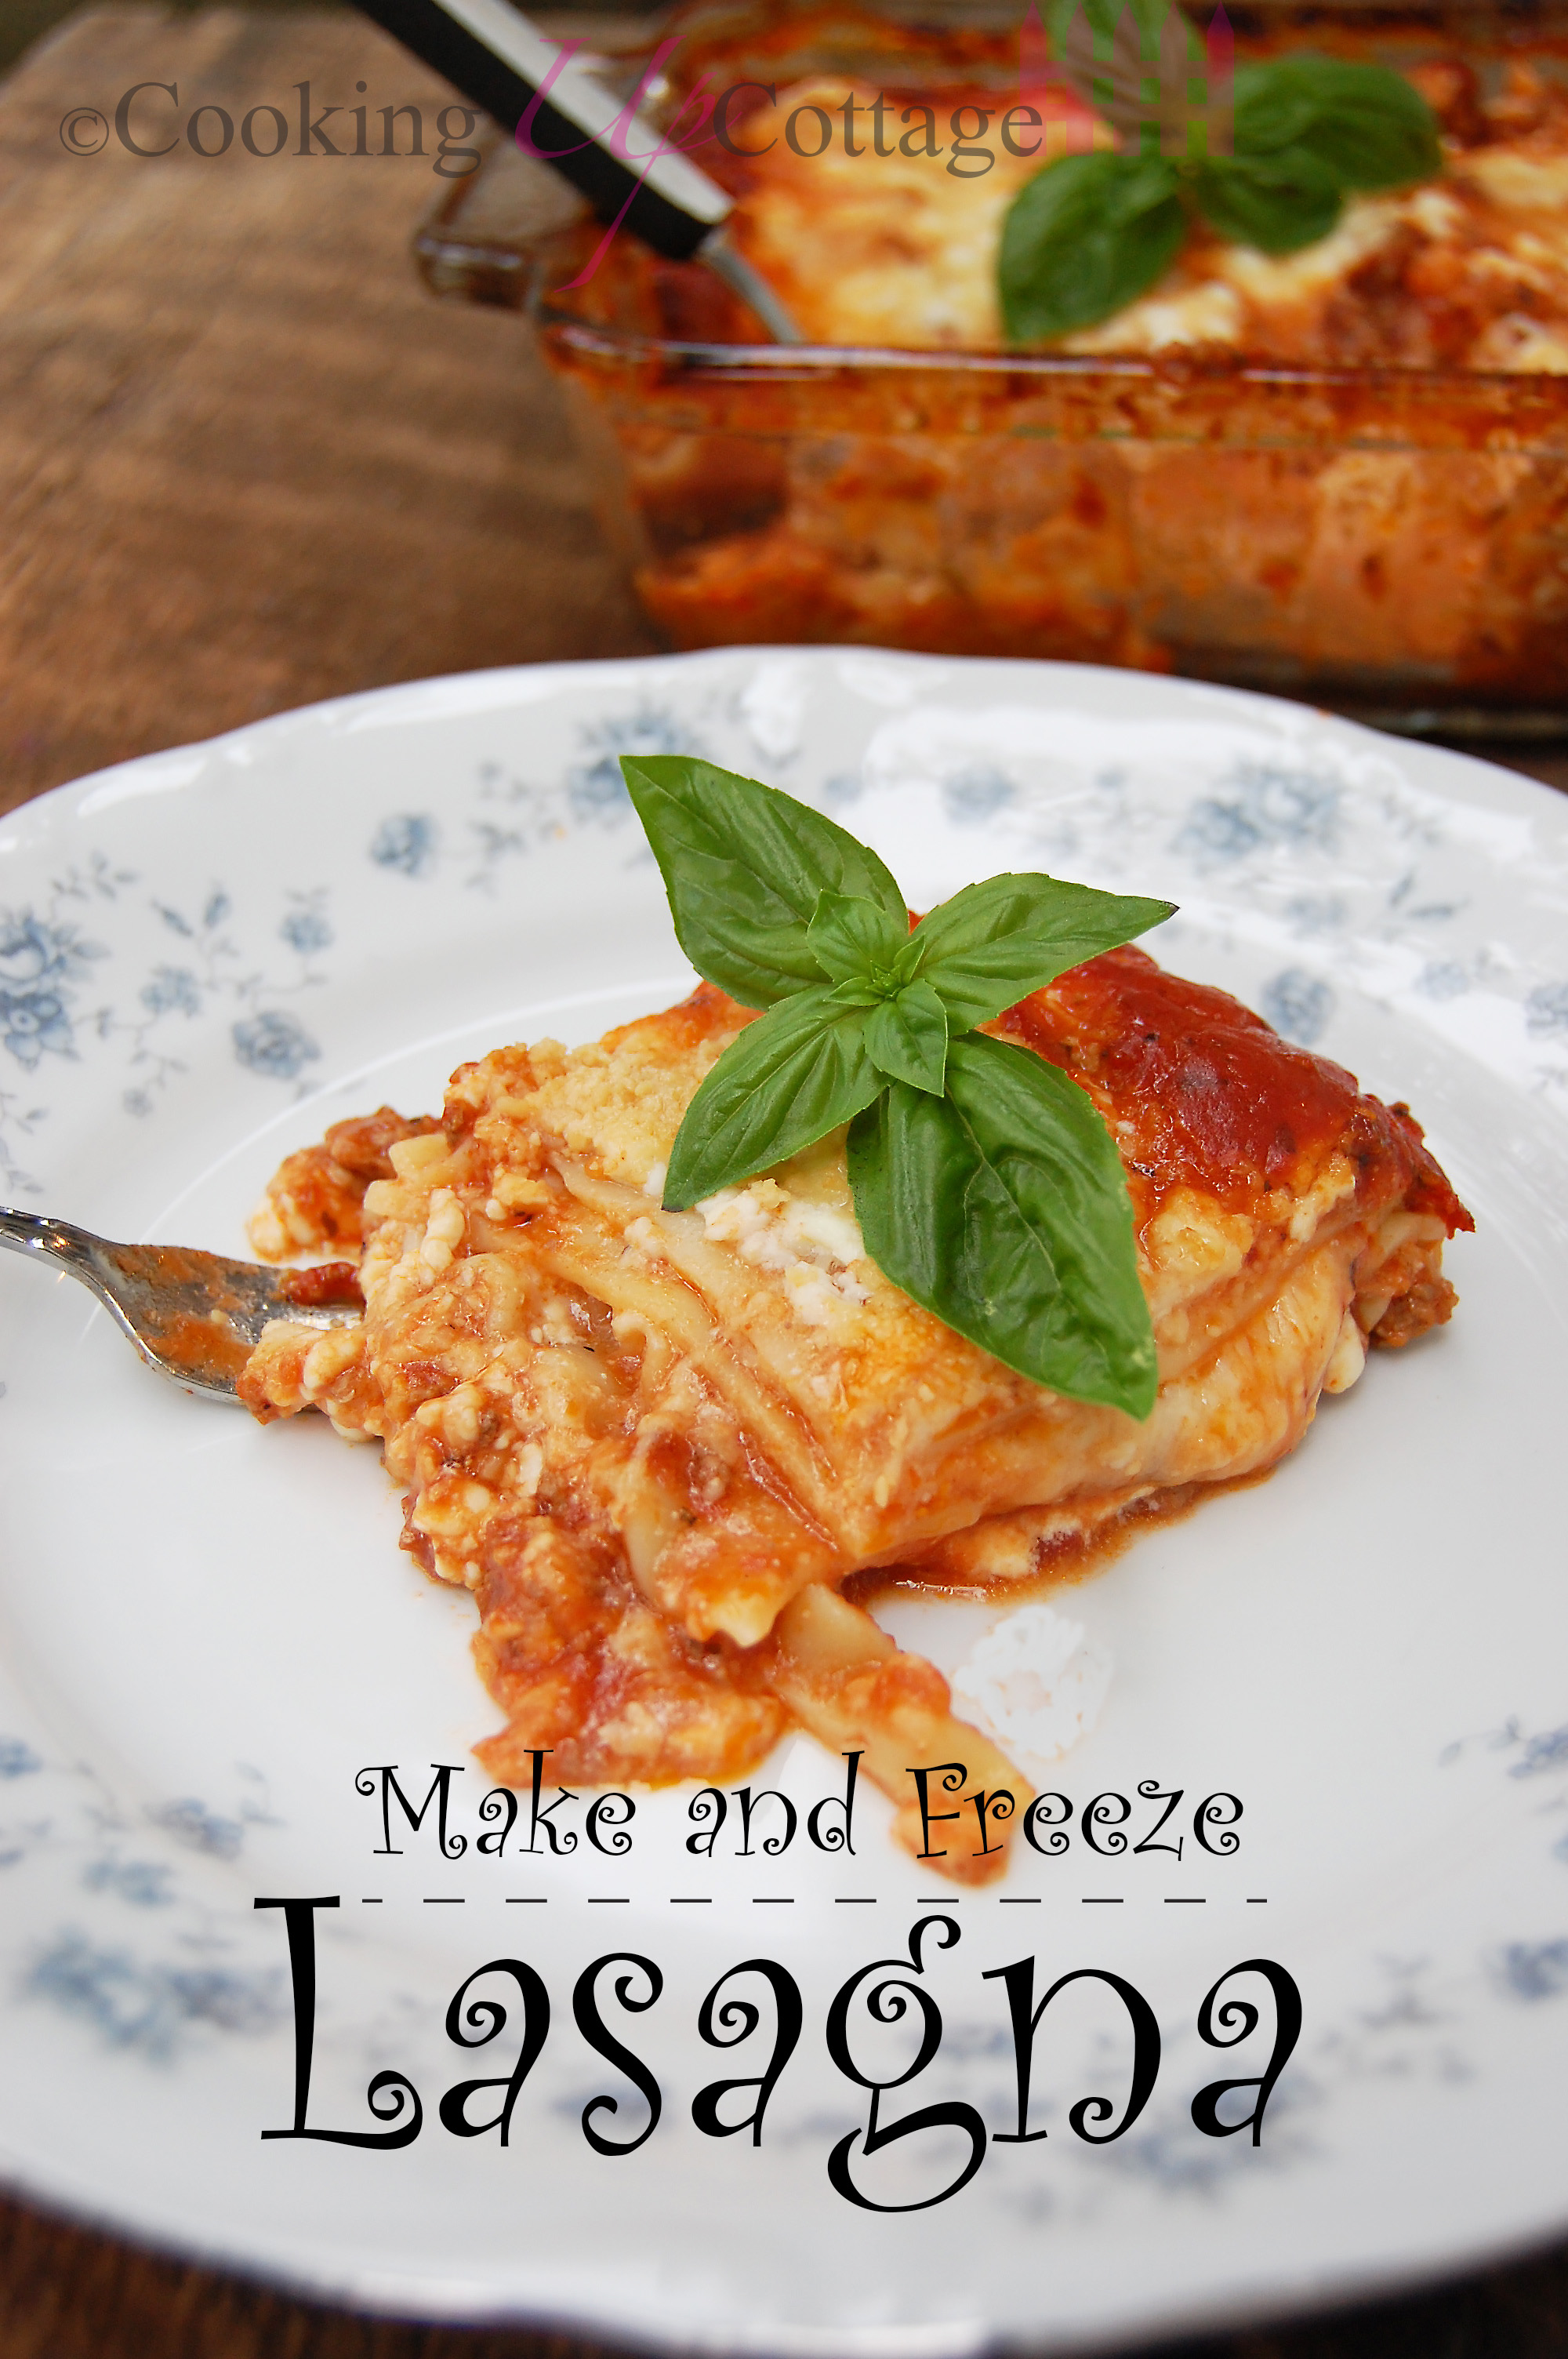 Make and Freeze Lasagna – Cooking Up Cottage